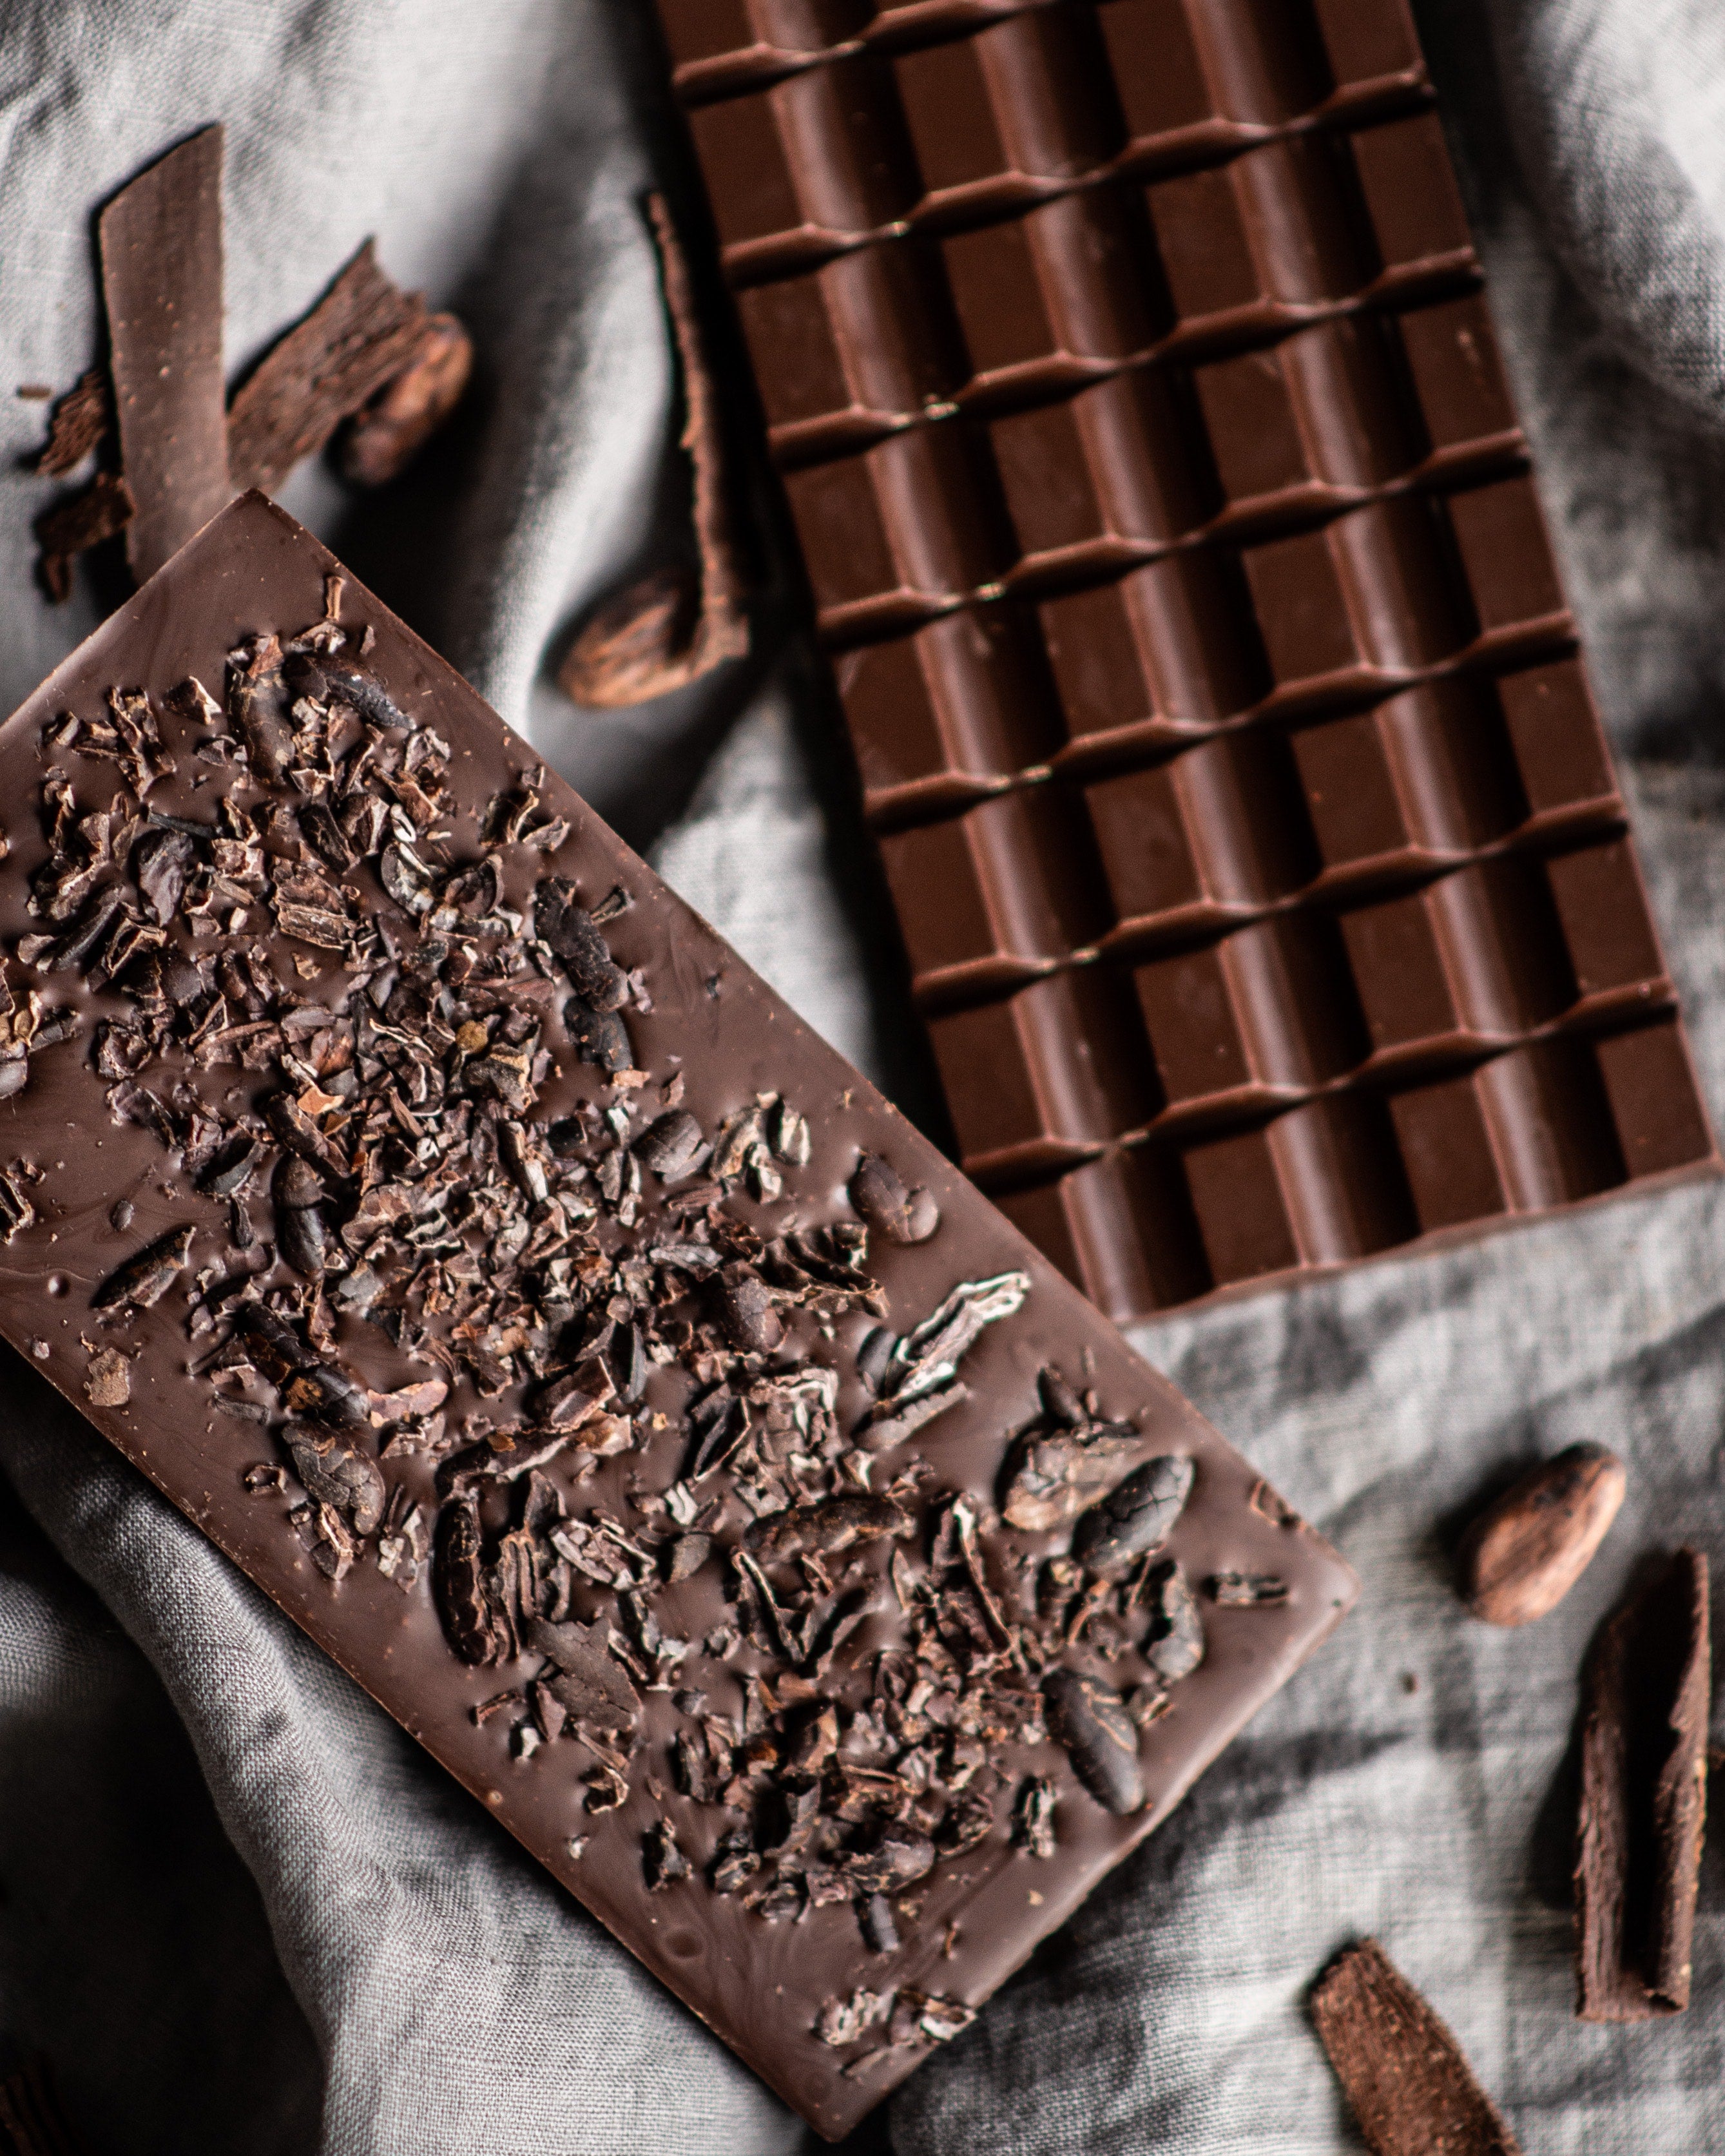 What are the recognized virtues of quality chocolate?